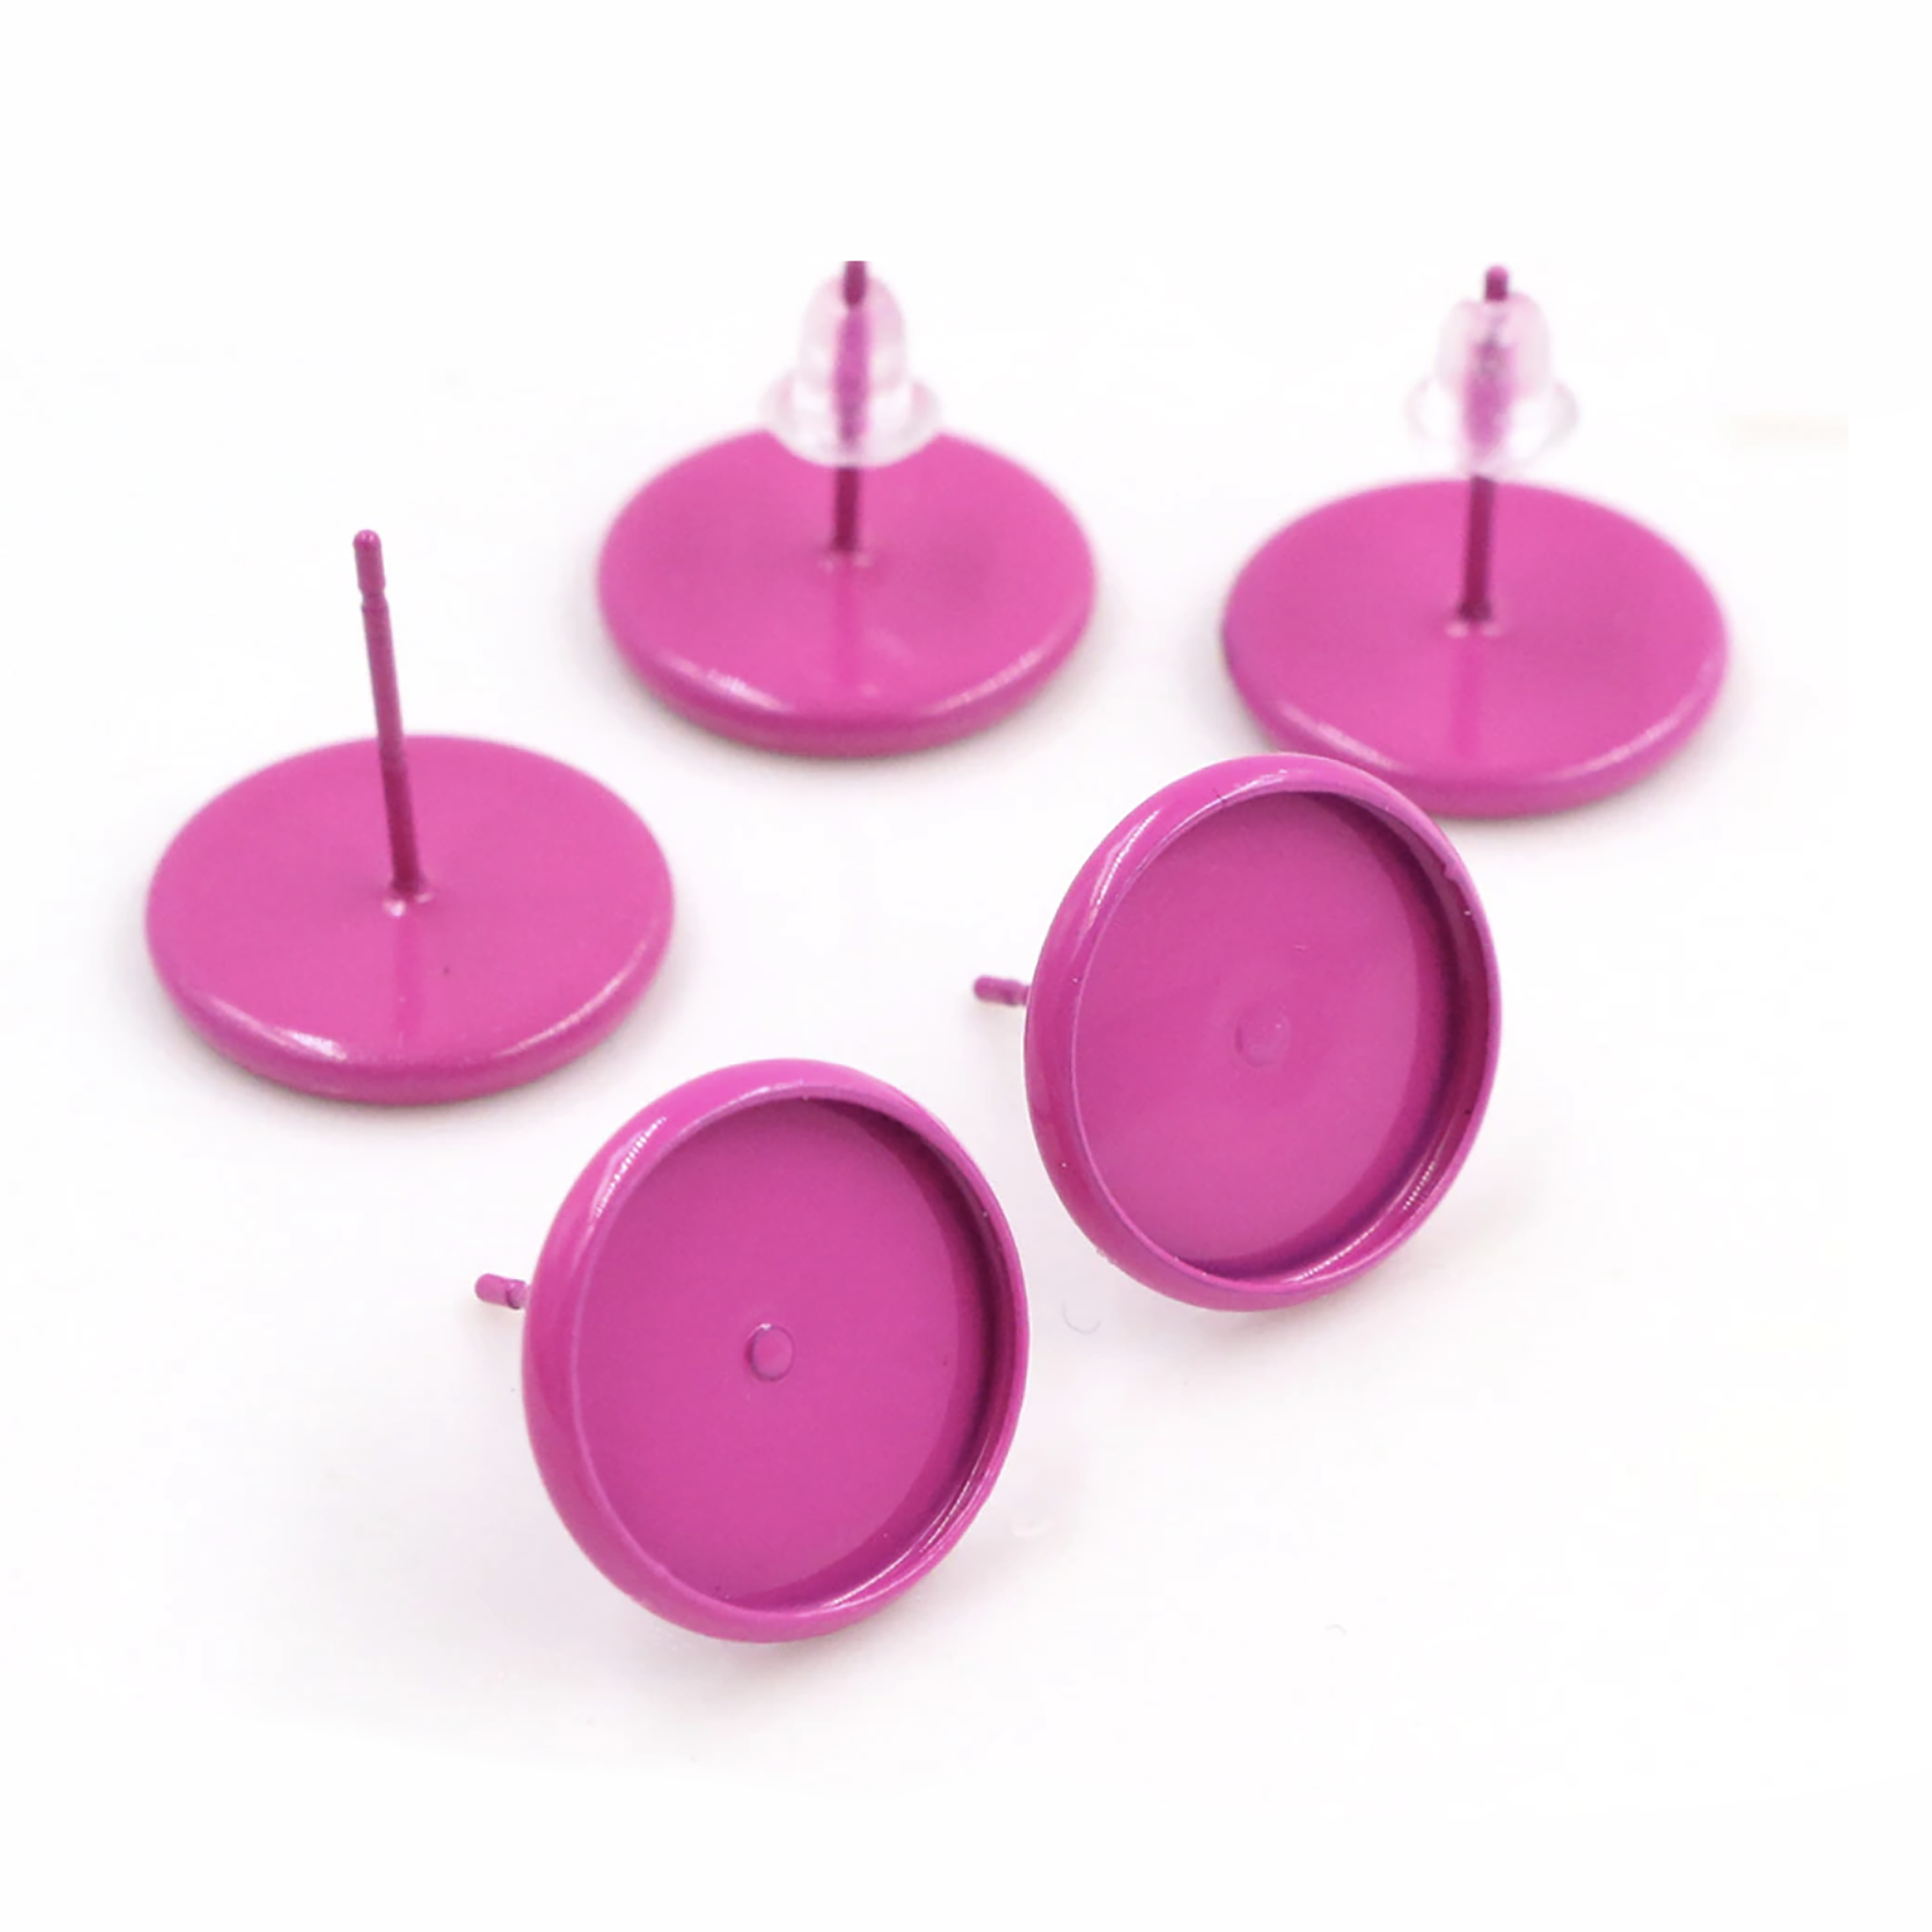 4pcs, 12mm Tray, Color Plated Earring Studs / Settings, Earrings Blank, Lead free and nickel free in Fuchsia